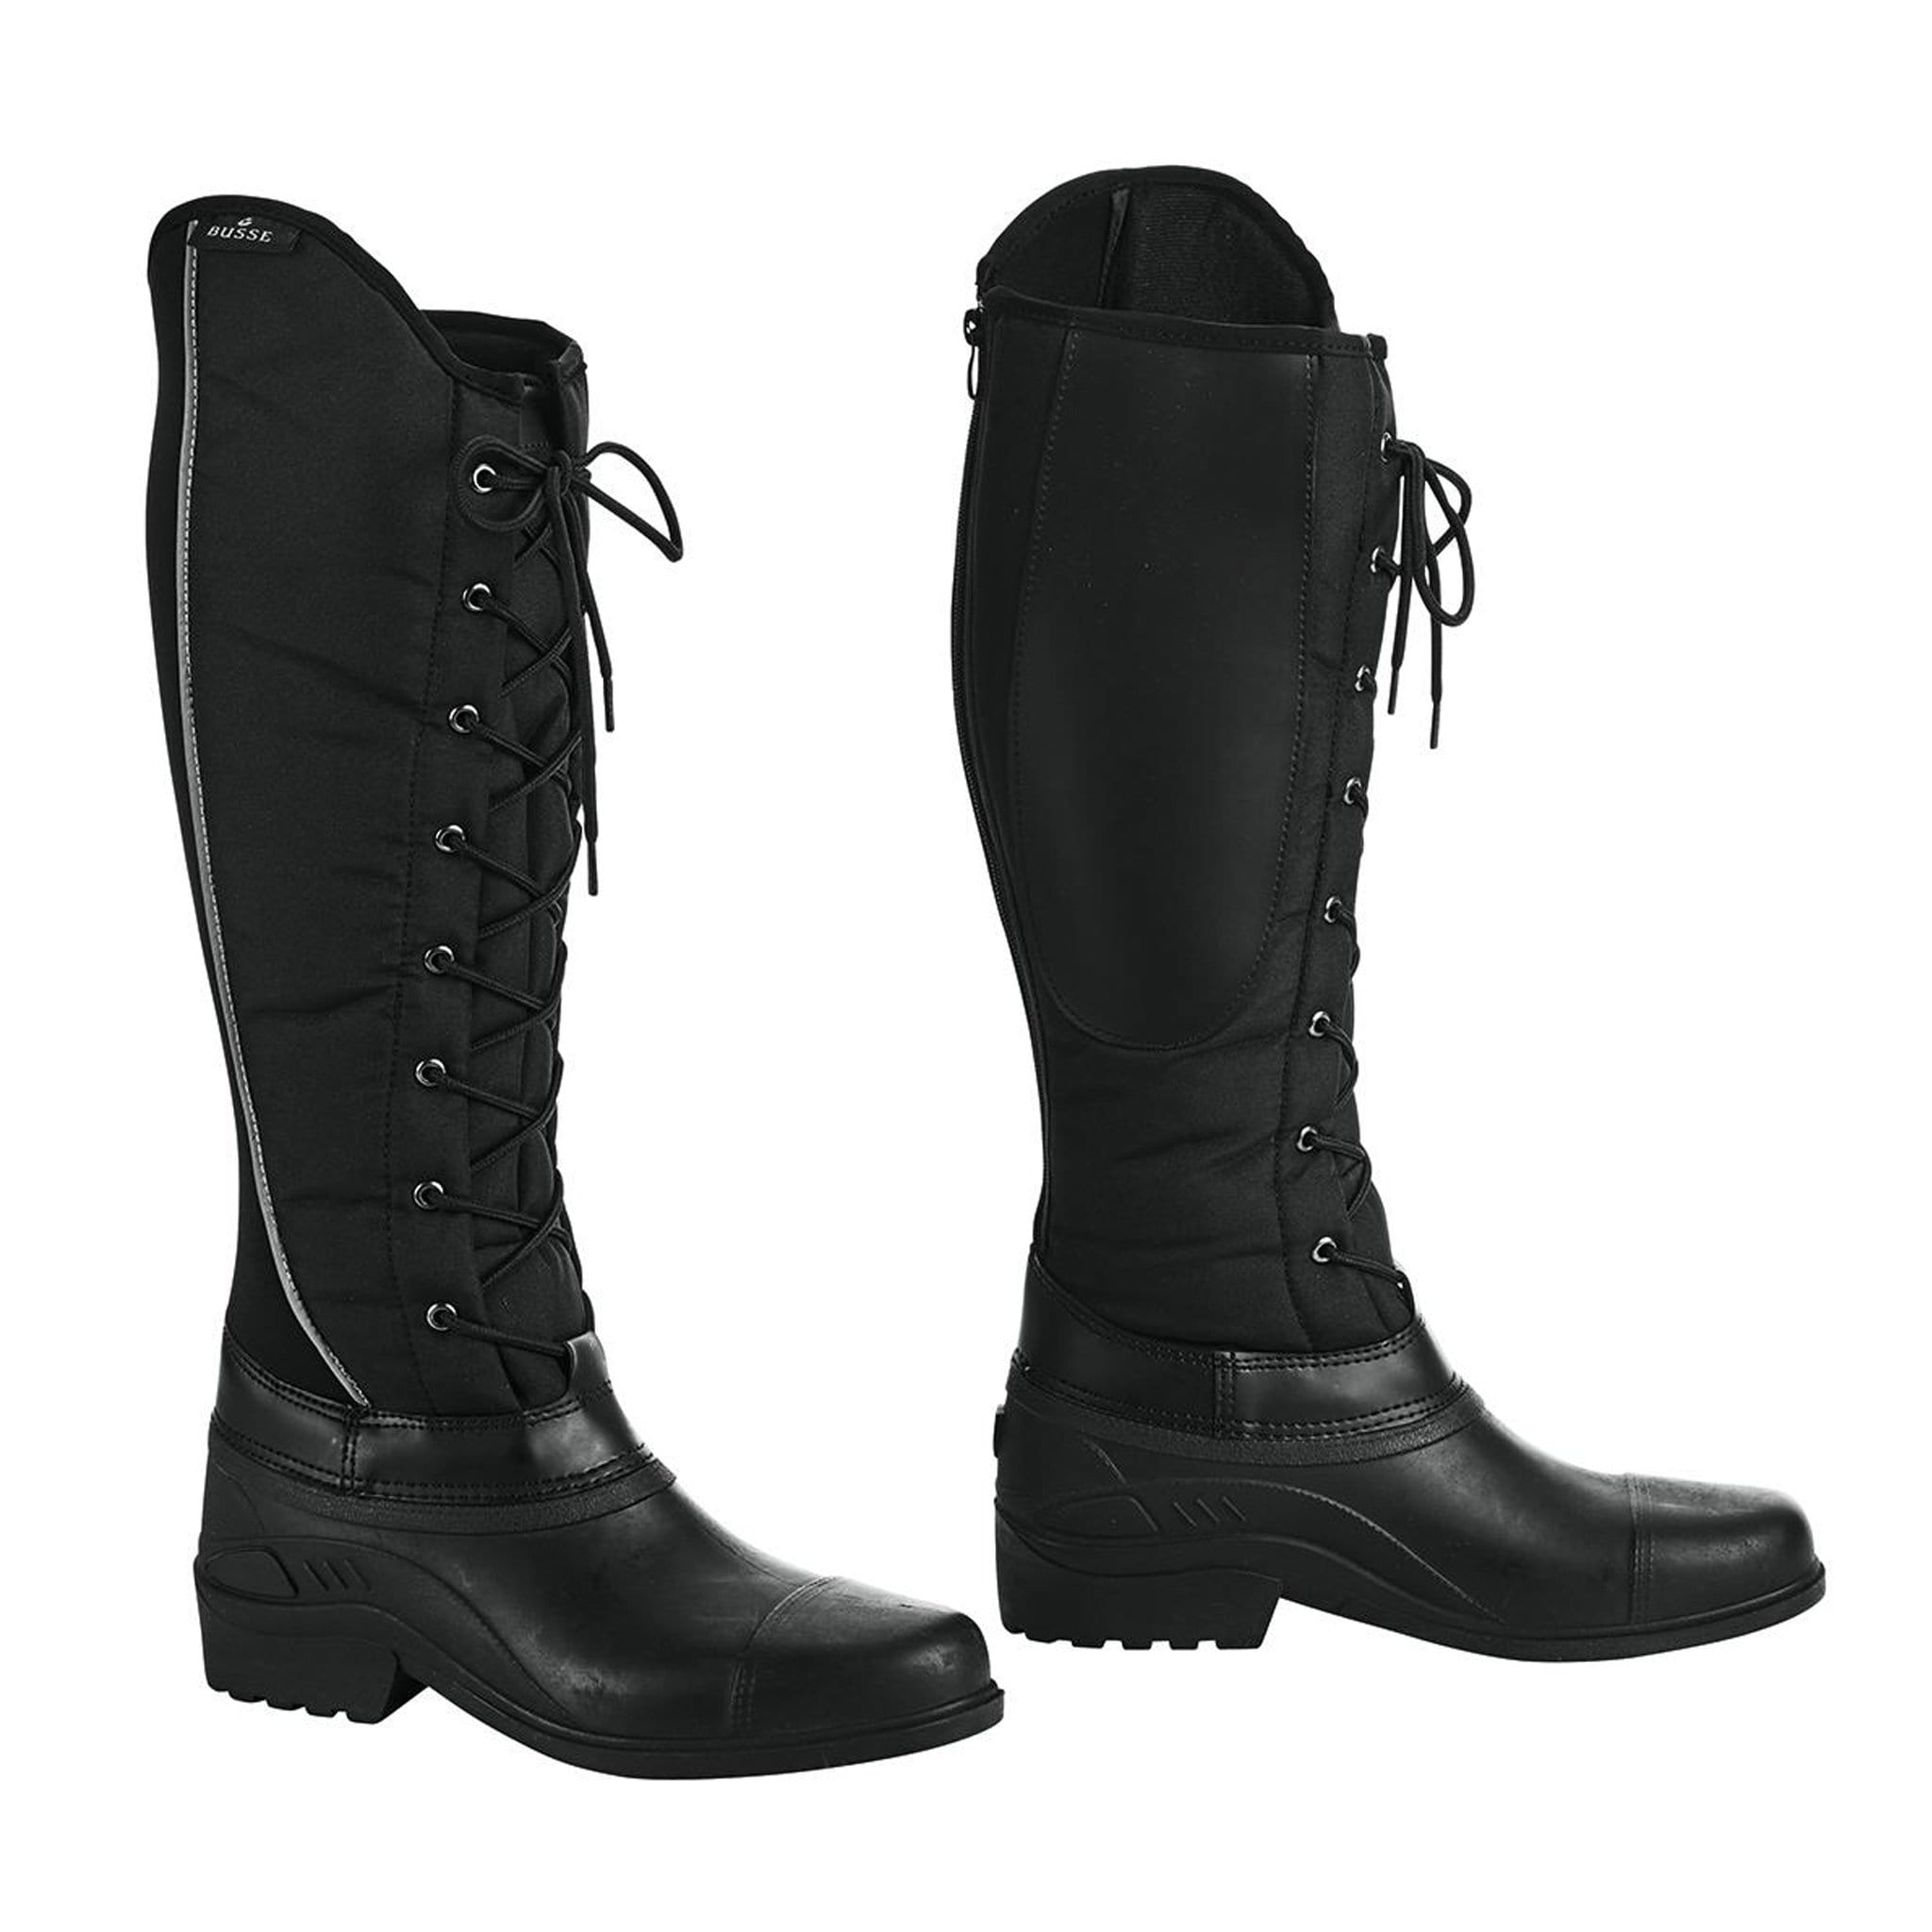 Busse Edmonton Thermo Boots 726335 Black Side View